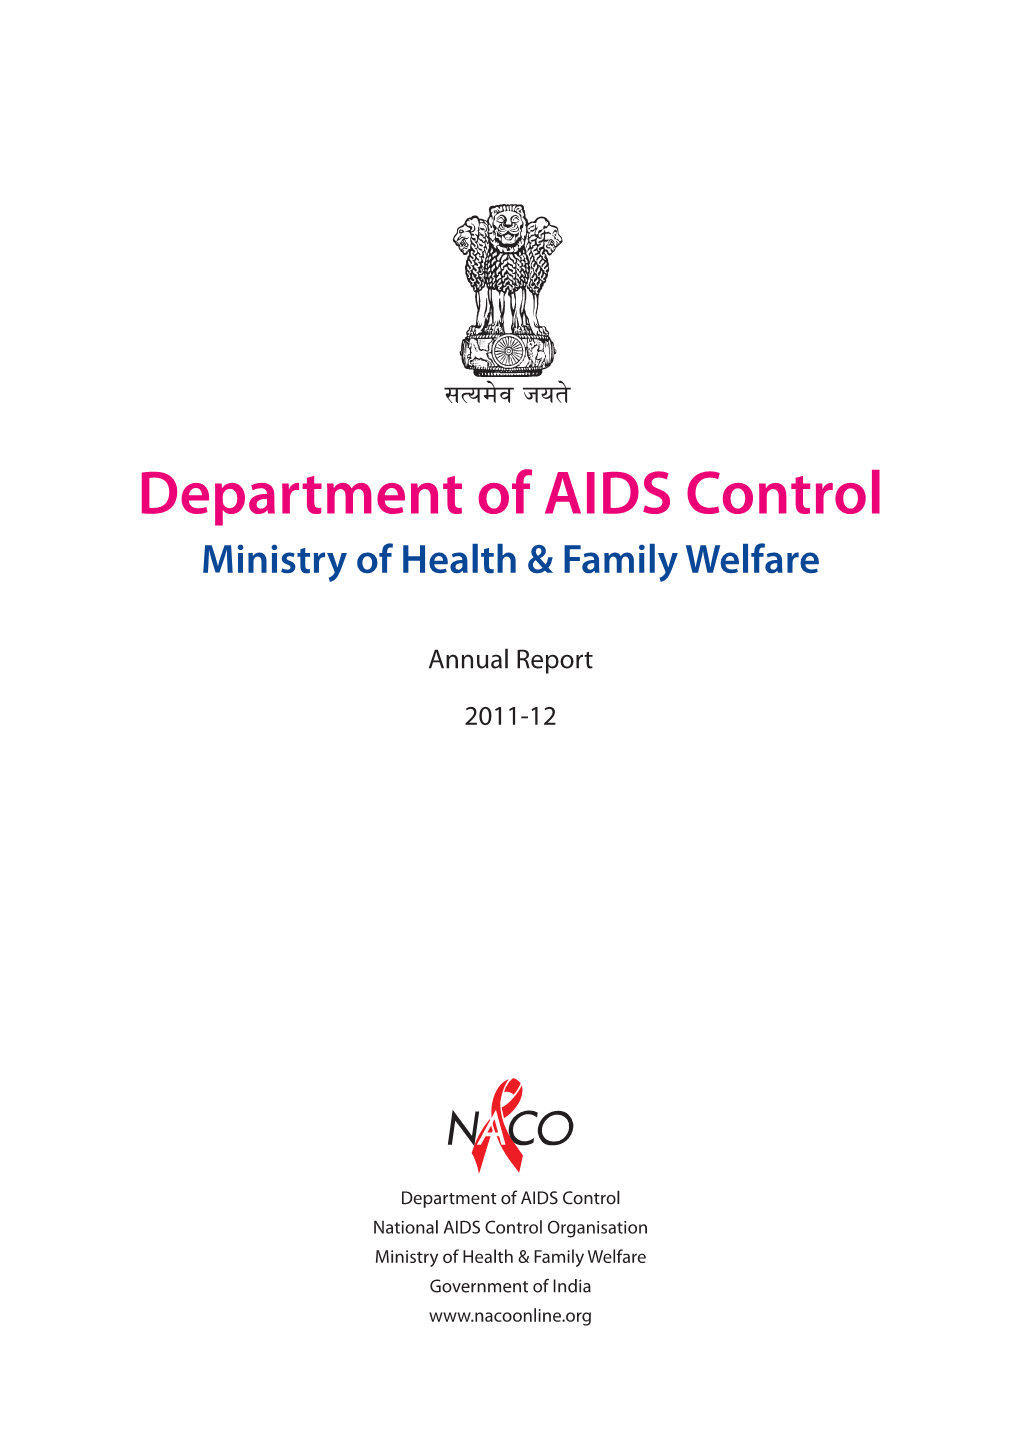 Department of AIDS Control Ministry of Health & Family Welfare